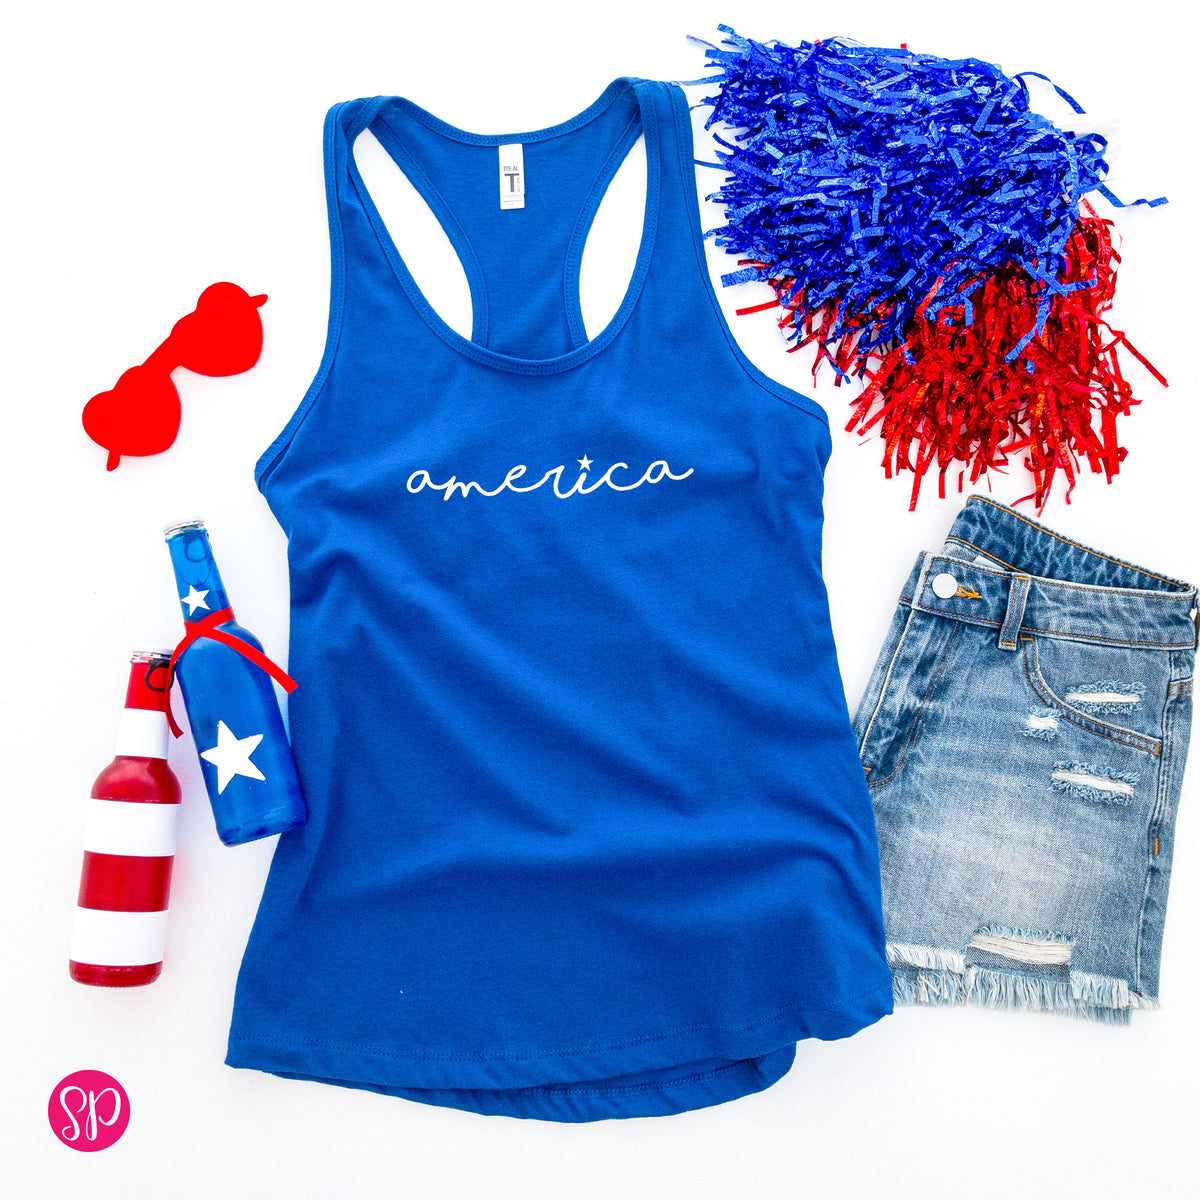 America with Star I Tank Top